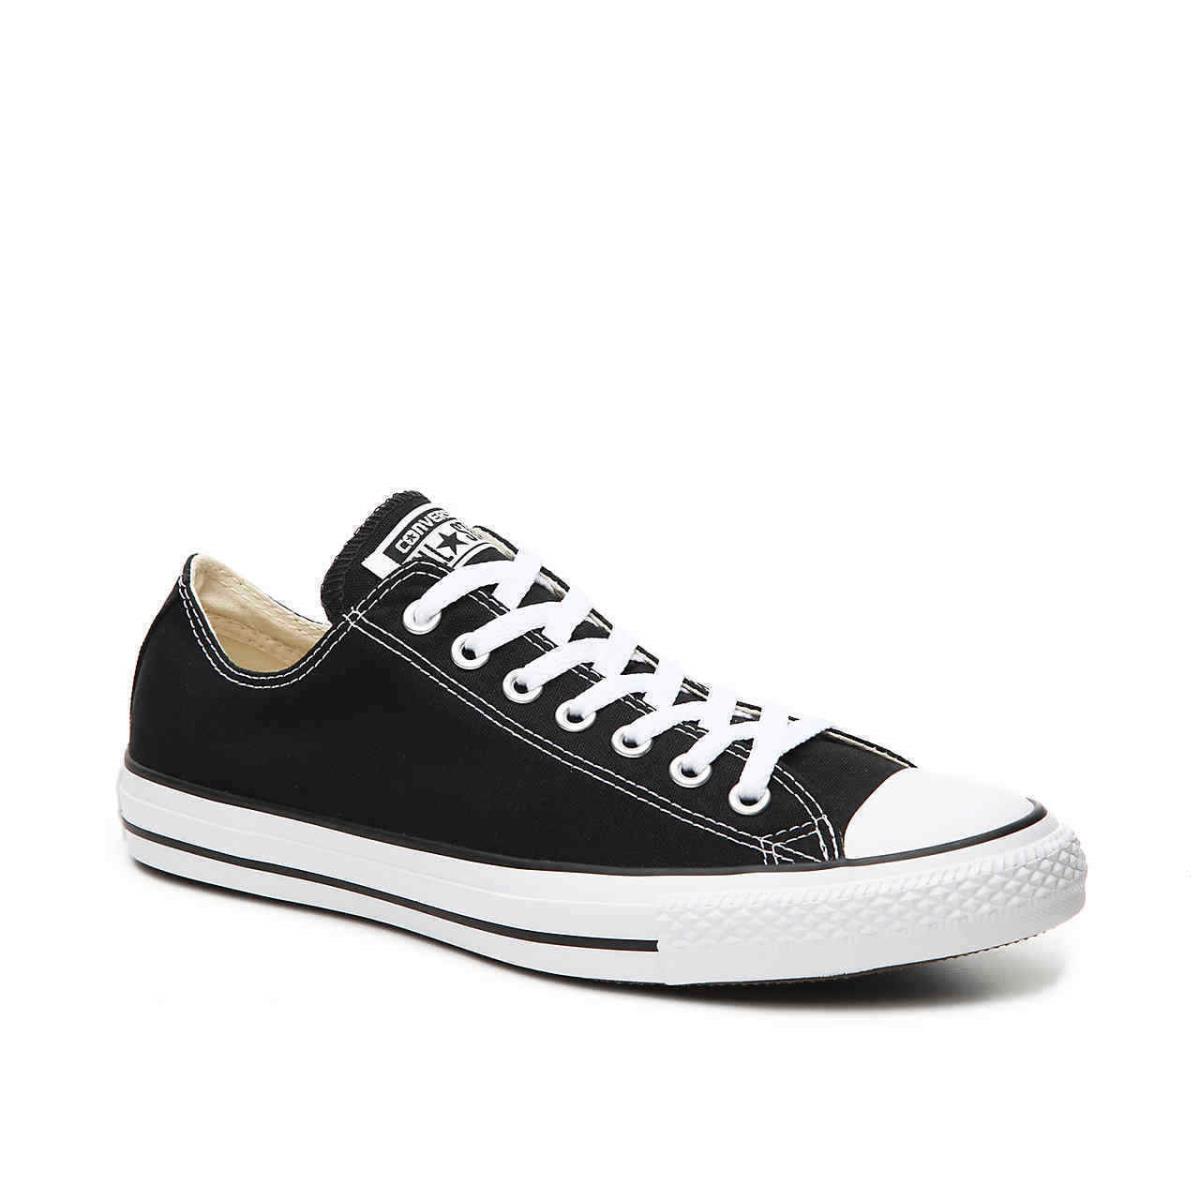 Converse All Star Chuck Taylor Canvas Low Top M9166 Black/white Shoes Sneakers